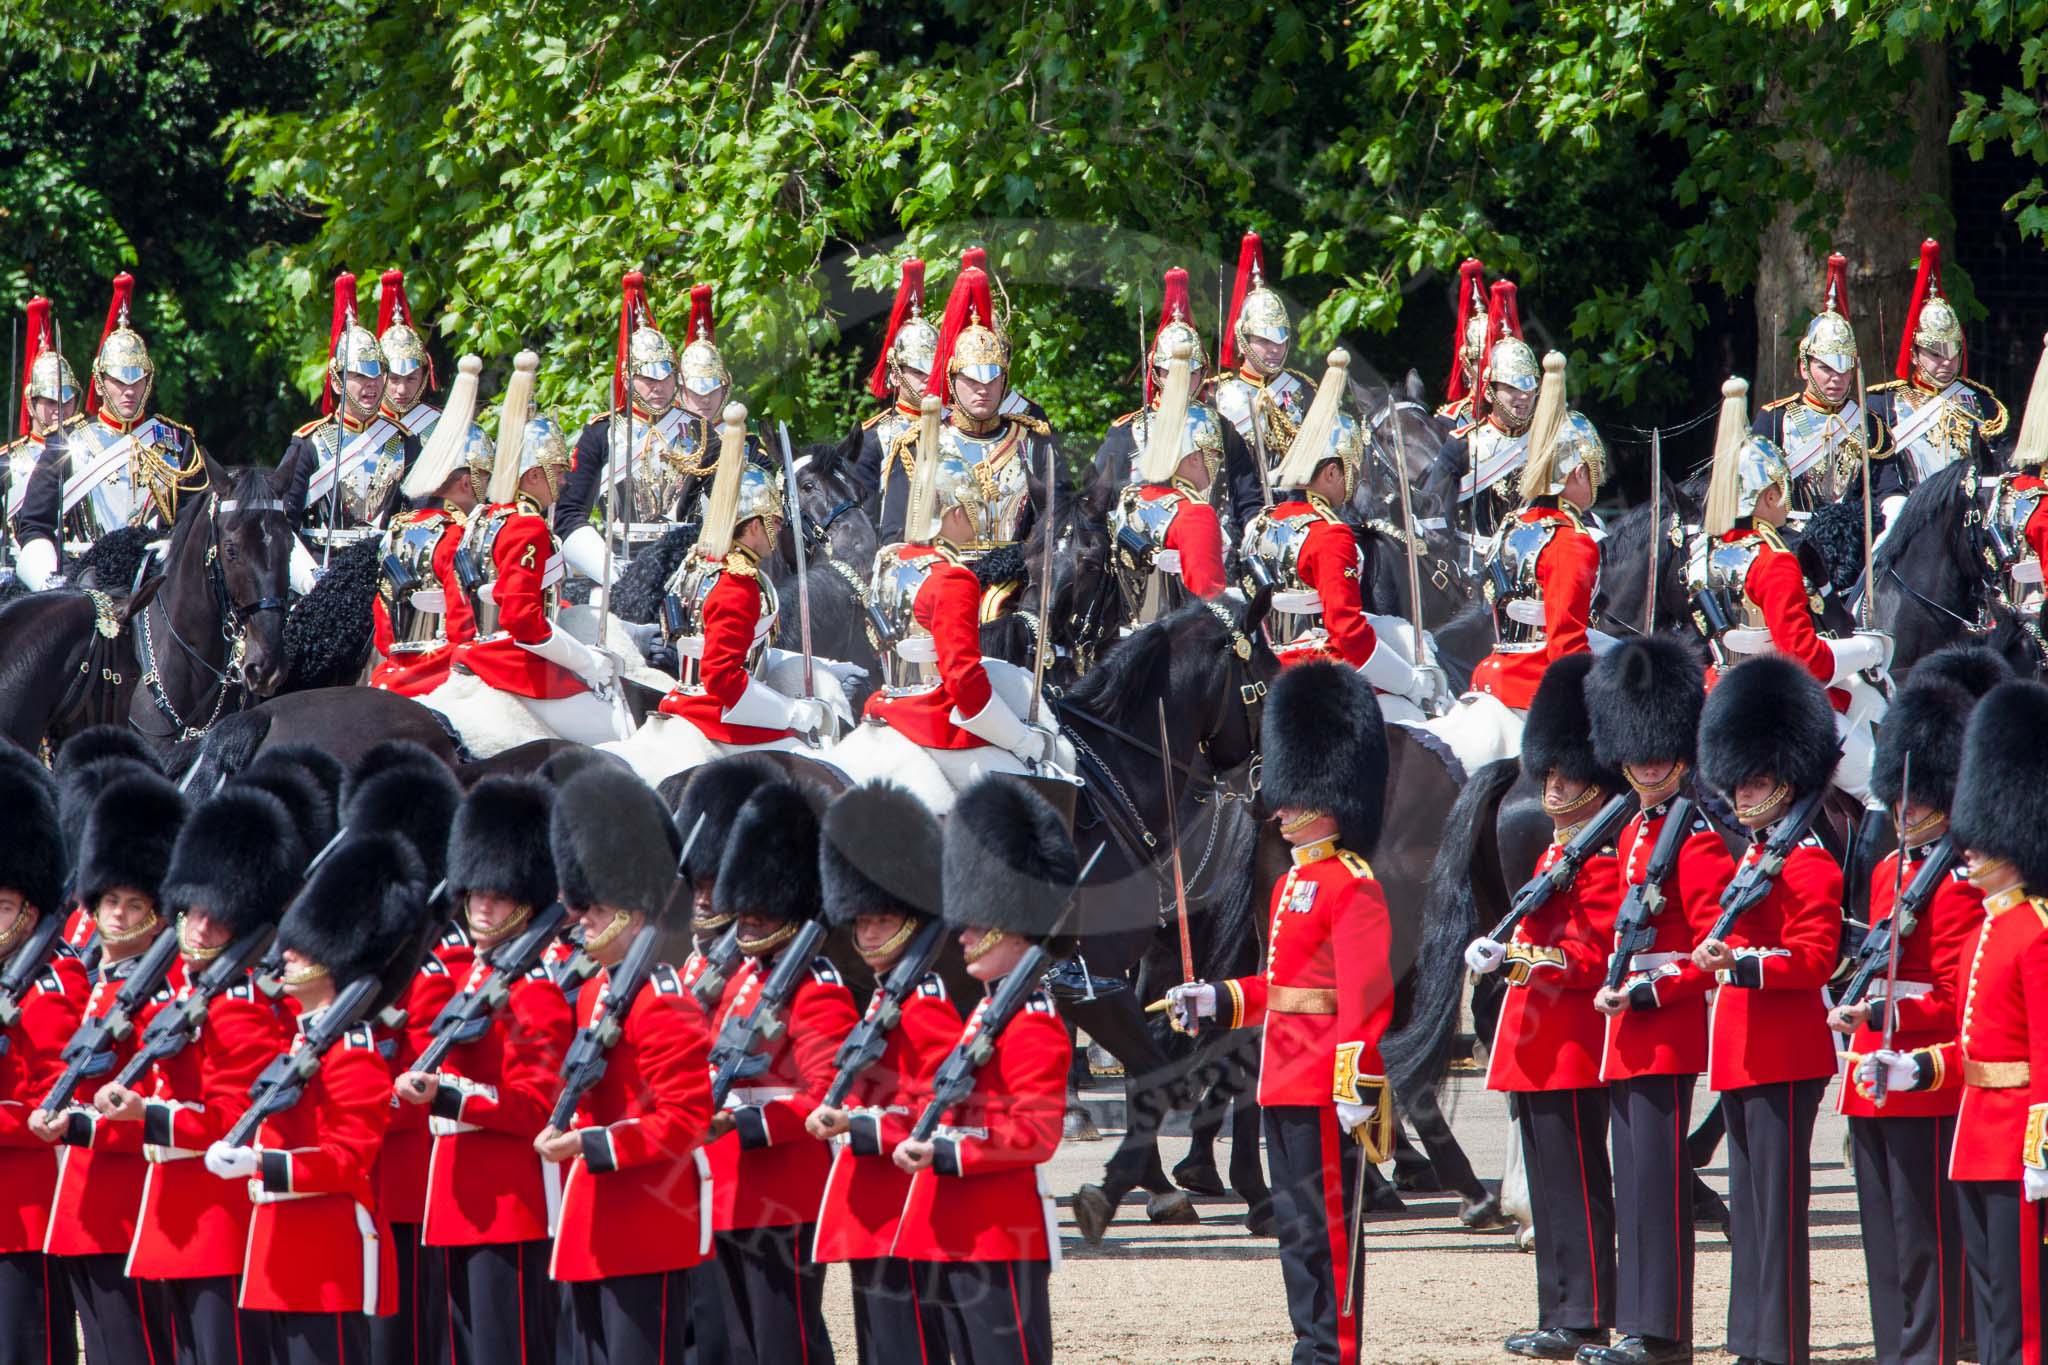 The Colonel's Review 2013: The Household Cavalry is marching off whilst the foot guards are waiting for the command by the Field Officer..
Horse Guards Parade, Westminster,
London SW1,

United Kingdom,
on 08 June 2013 at 12:05, image #818